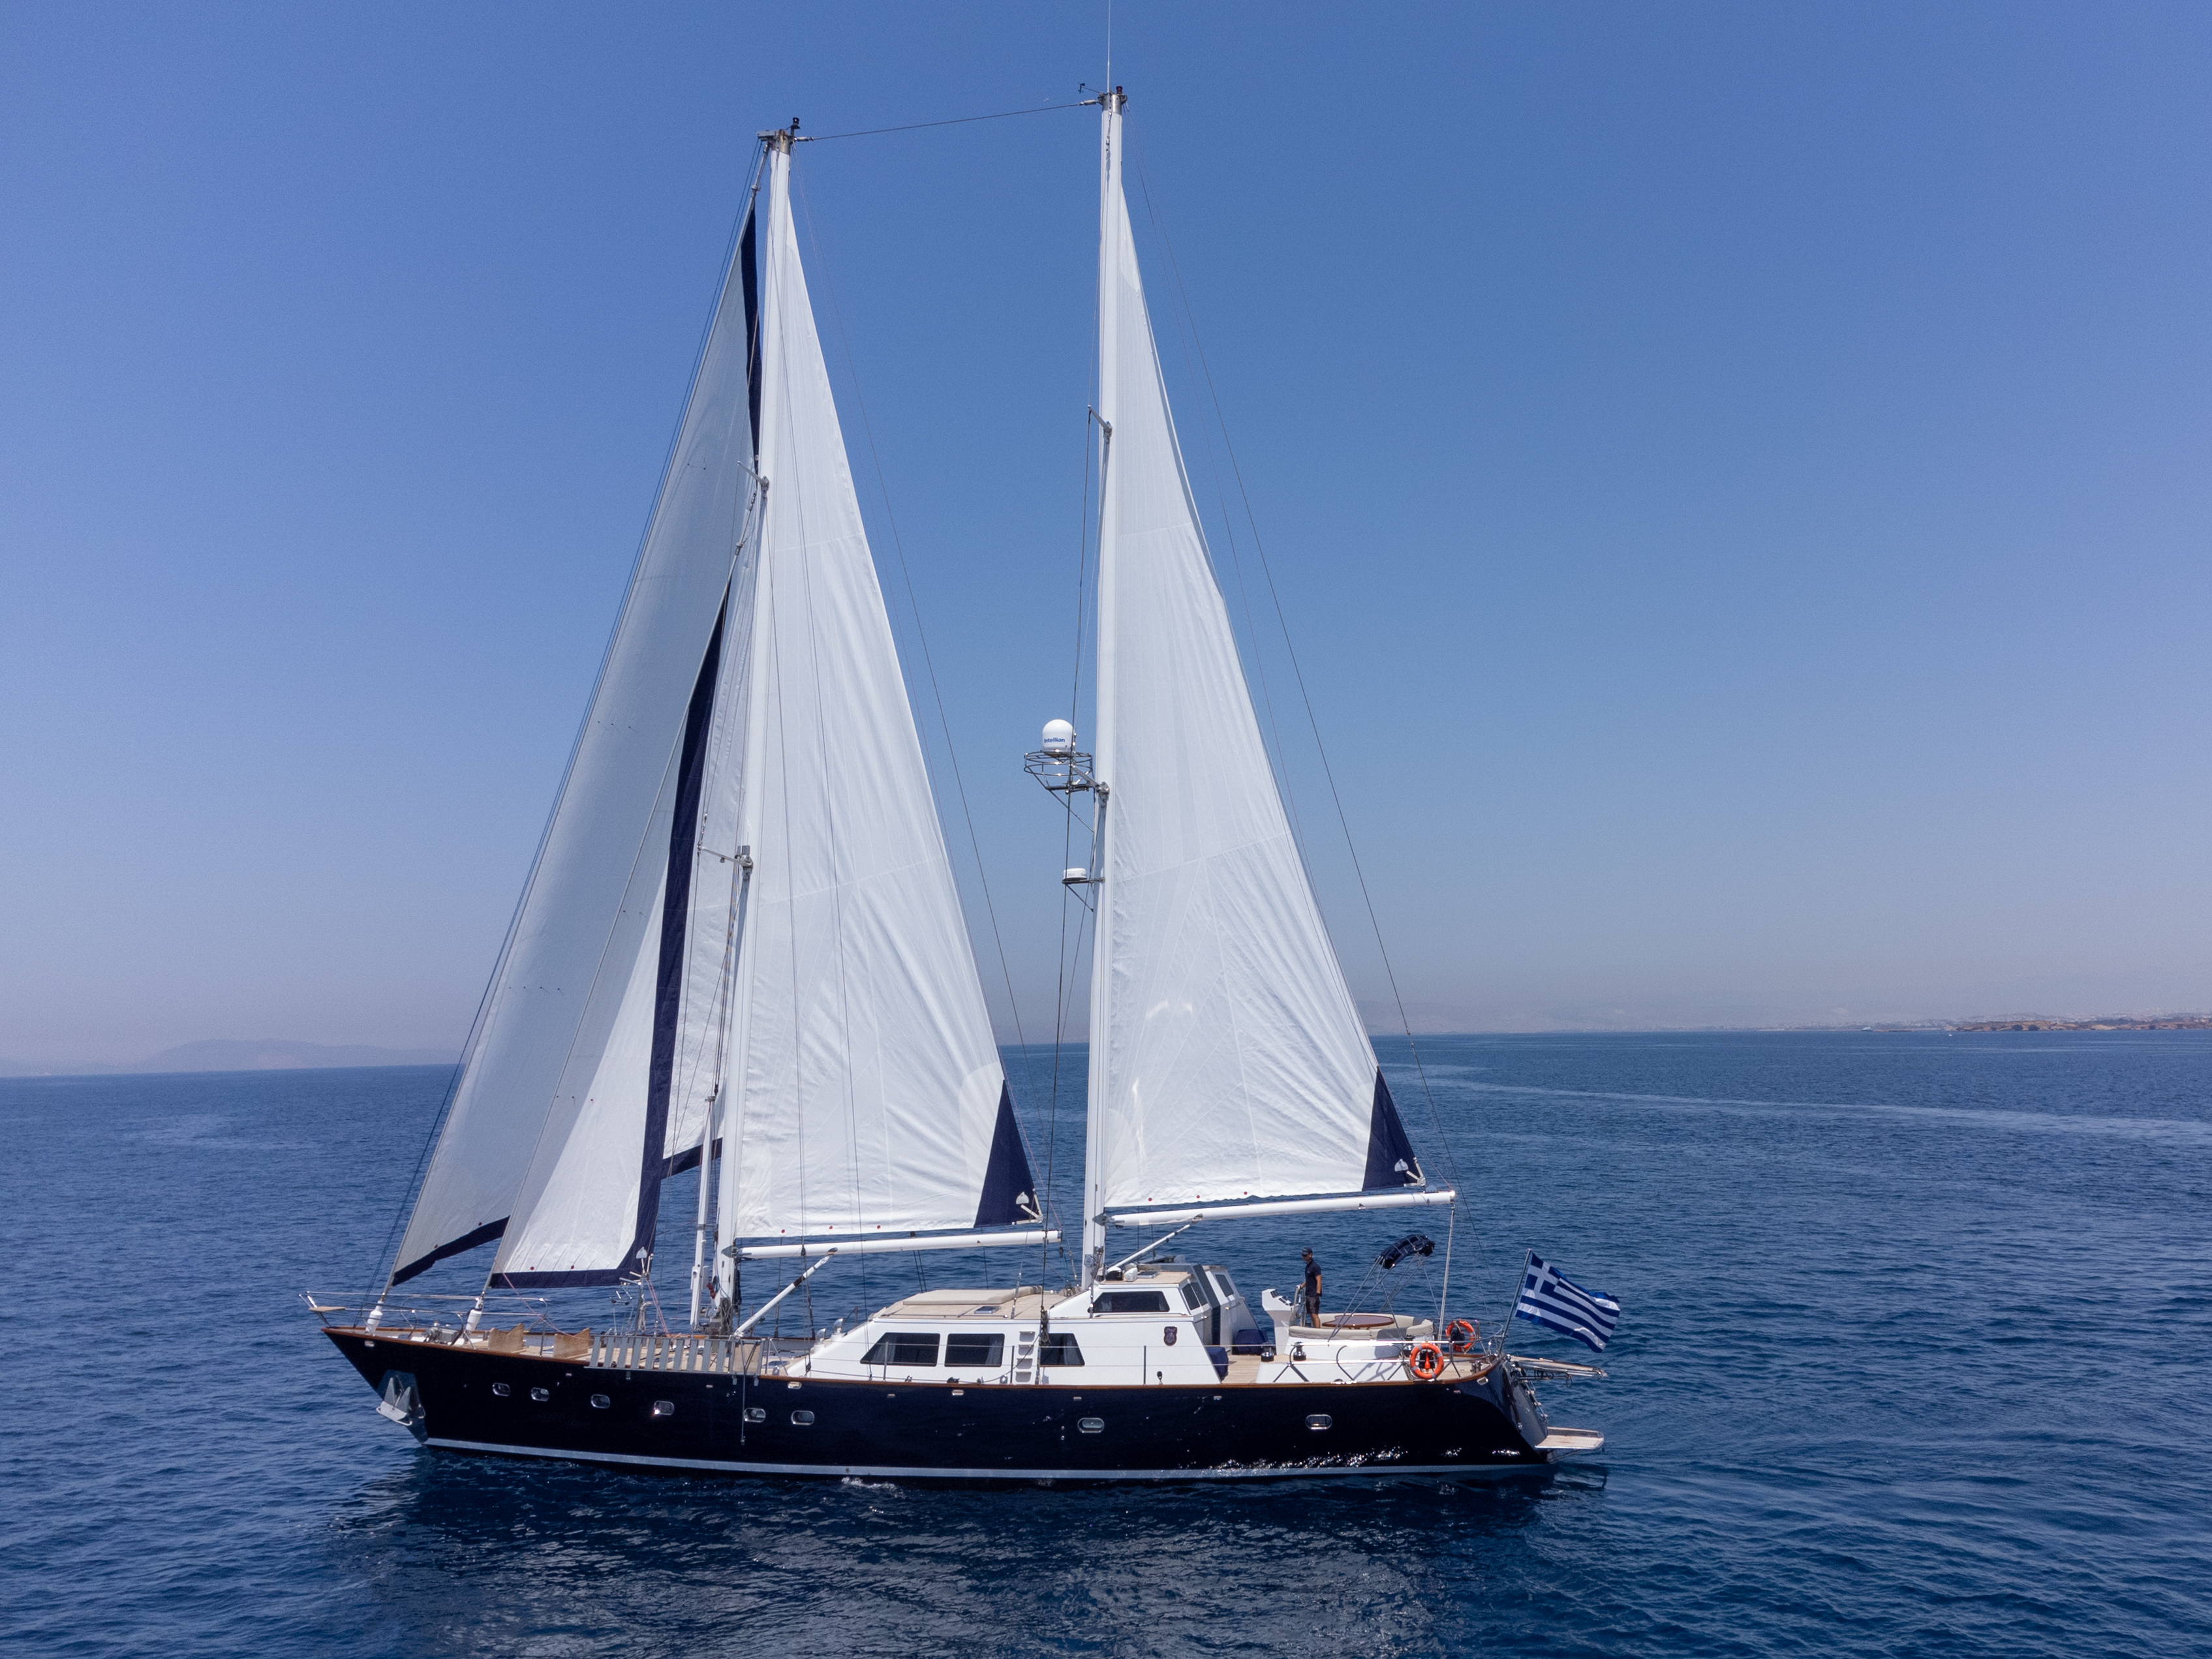 CCYD 85 - Gulet charter Greece & Boat hire in Greece Athens and Saronic Gulf Athens Piraeus Marina Zea 5